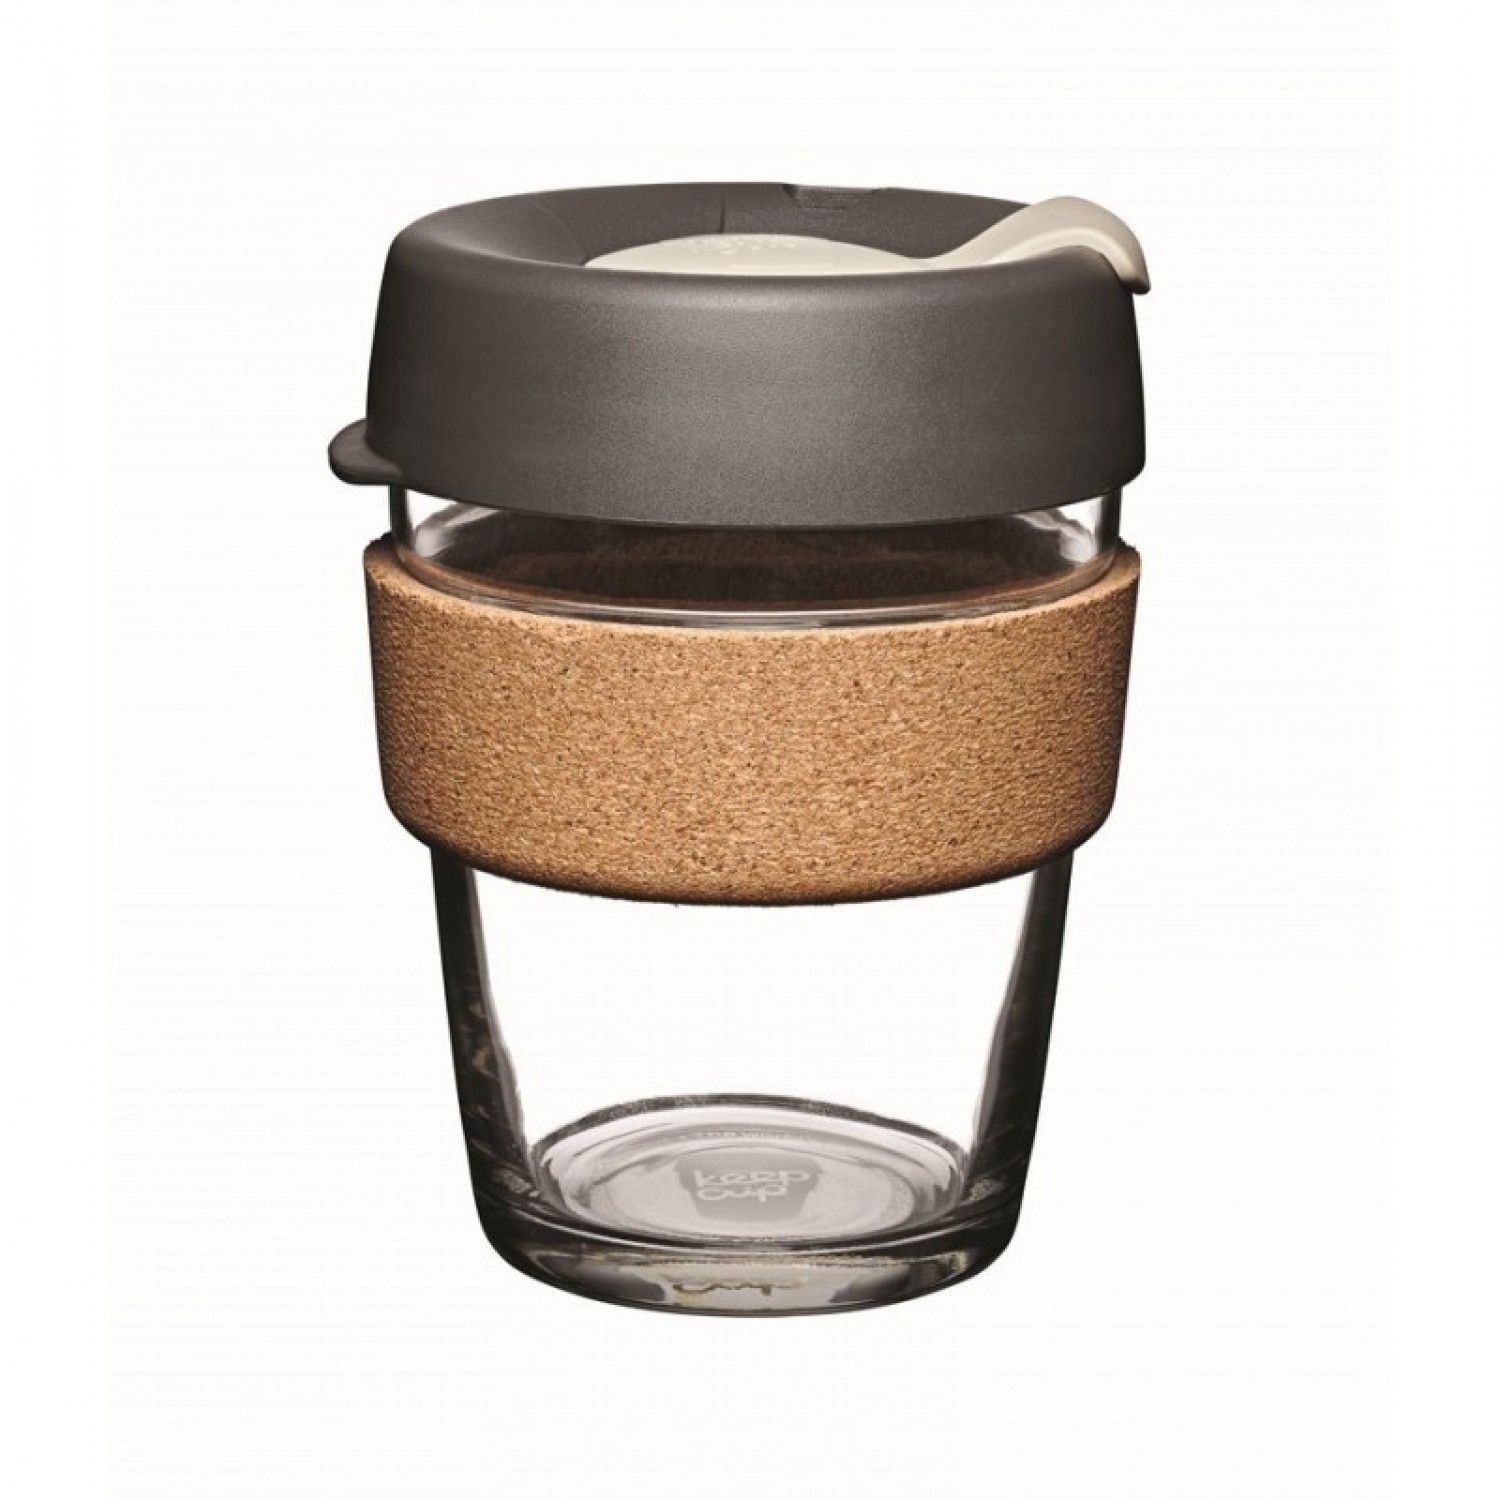 KeepCup Cork Press 12 oz - refillable cup made of glass with cork band